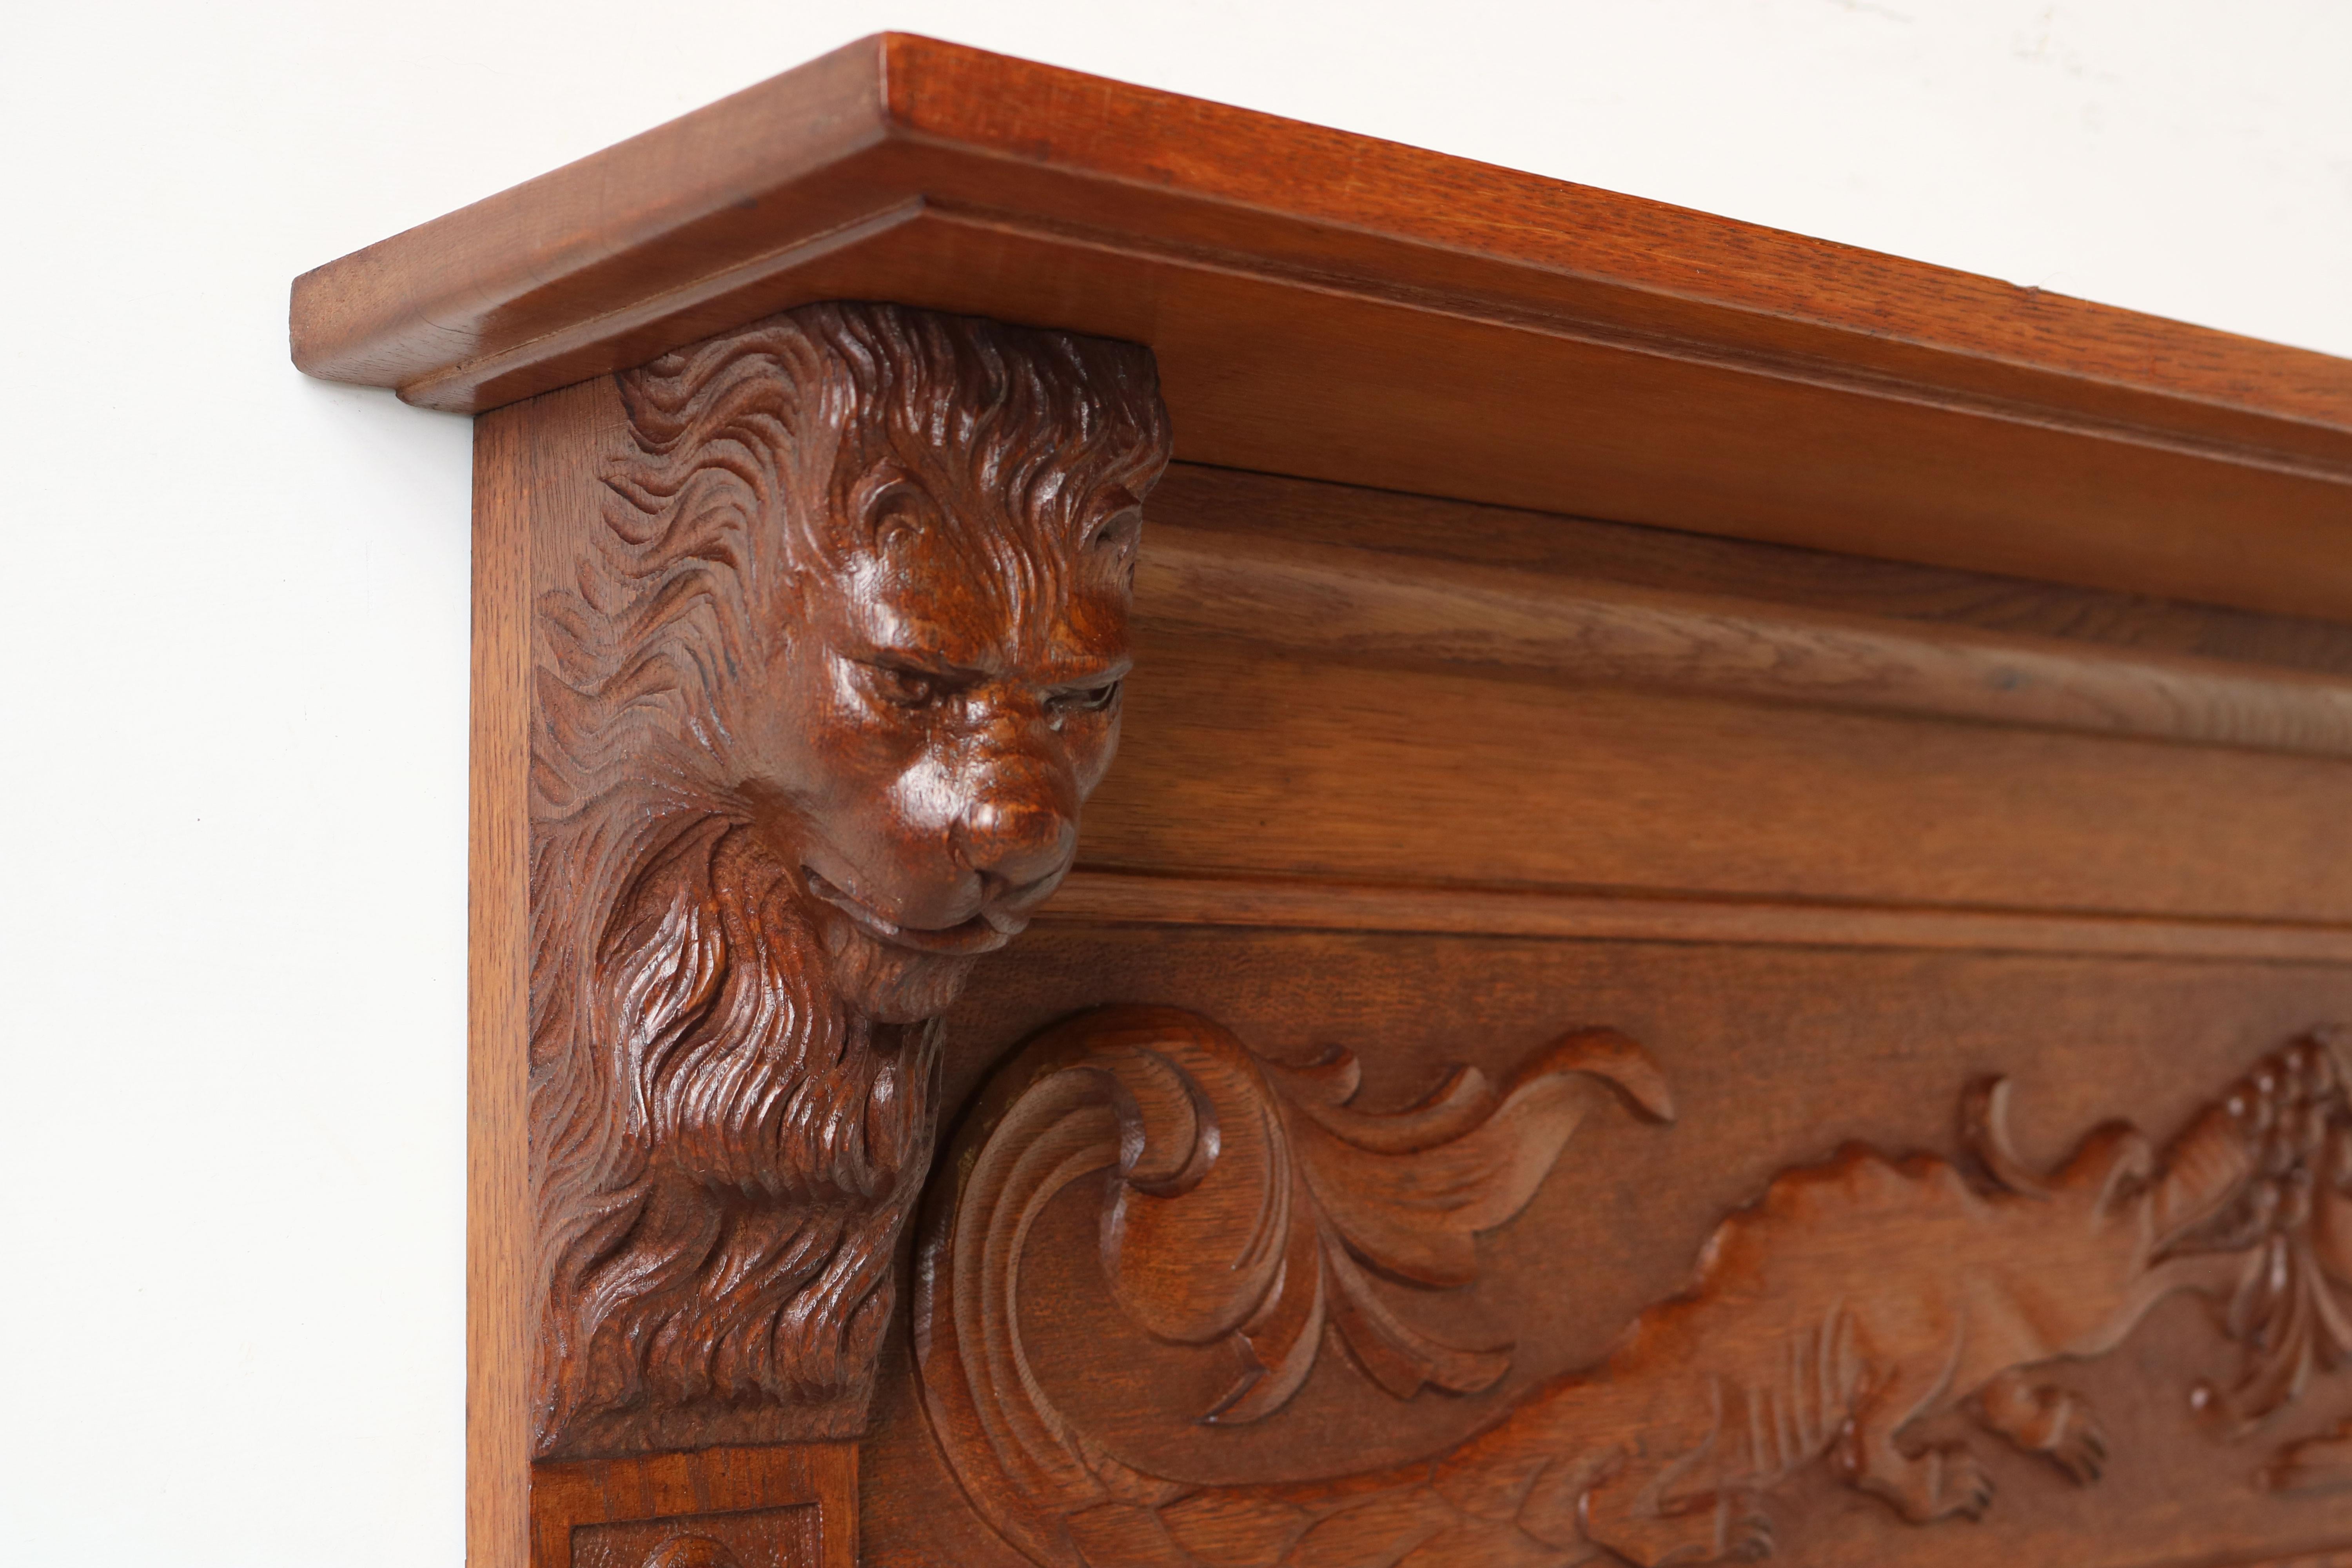 Exquisite & breathtaking! This 19th century French Renaissance Revival coat / hat rack with lion masks. 
Carved by a master carver out of solid European oak these 2 lion heads are just simply breathtaking. 
Very rare unusual scene displaying